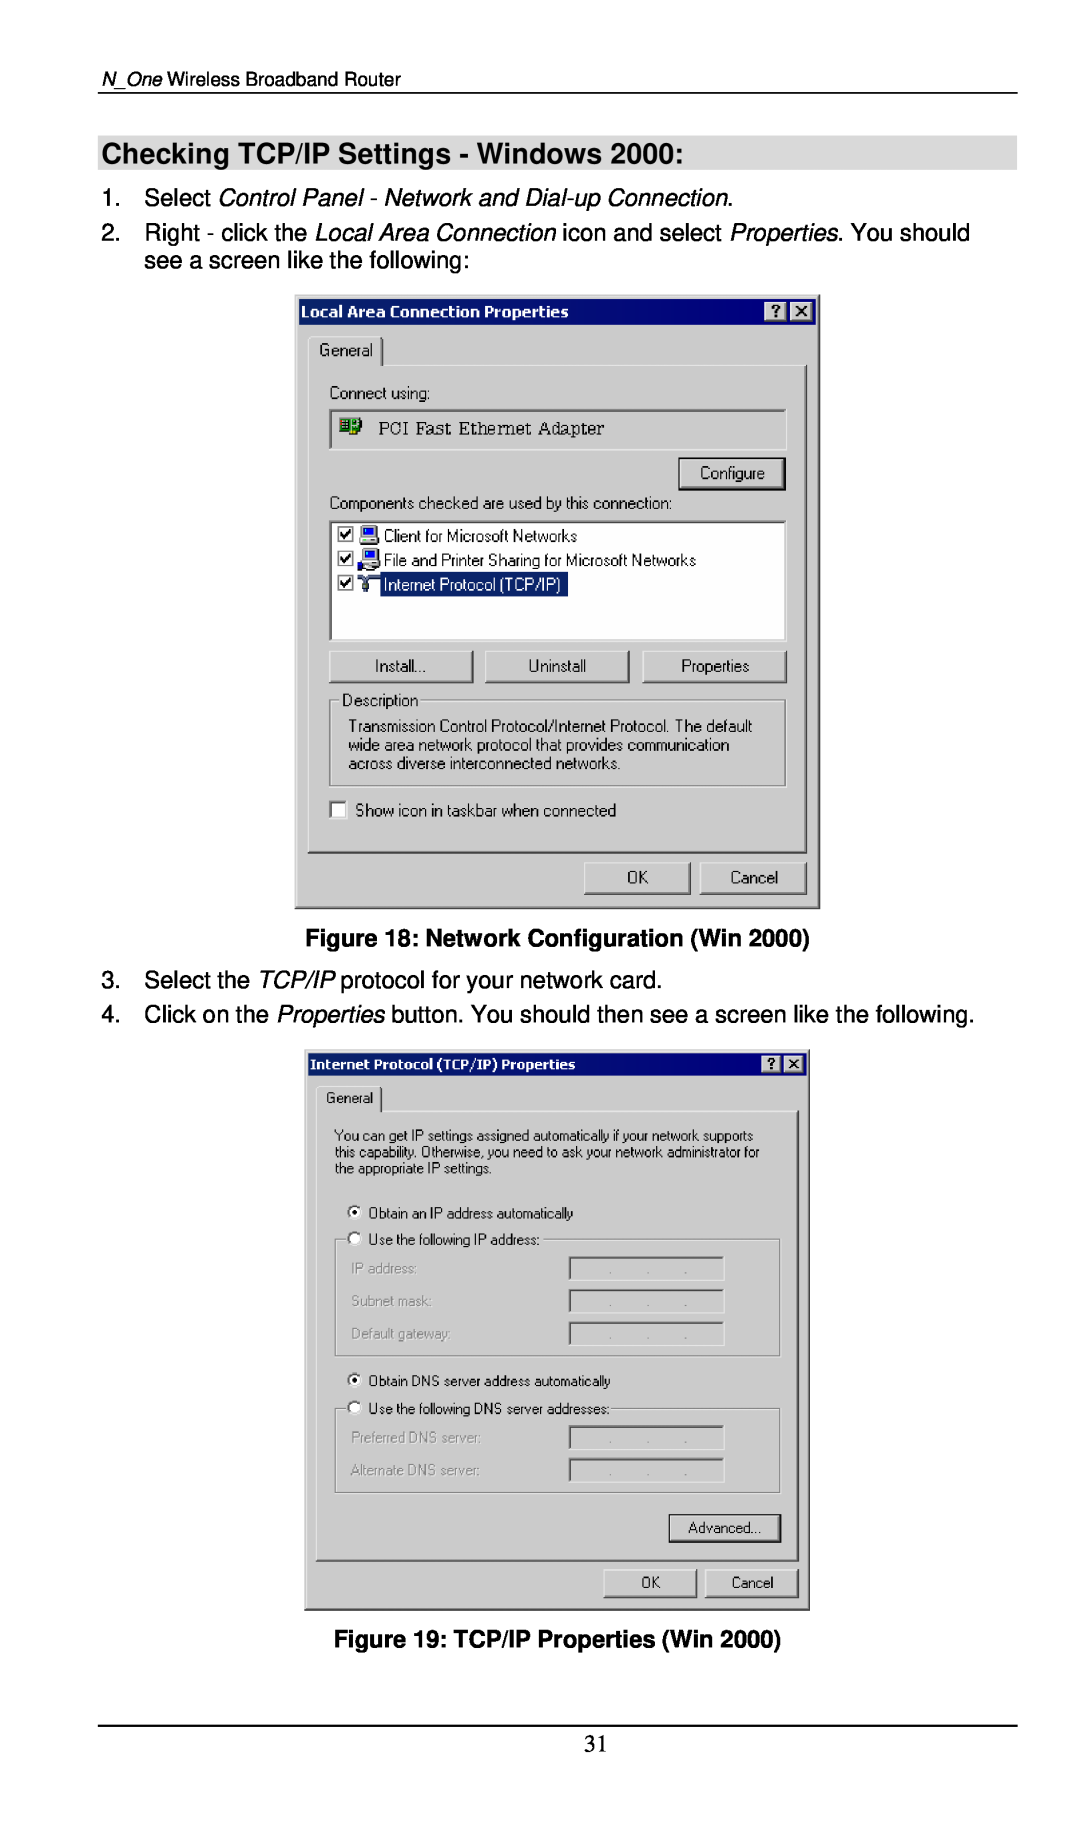 LevelOne WBR-6000 user manual Checking TCP/IP Settings - Windows, Select Control Panel - Network and Dial-up Connection 